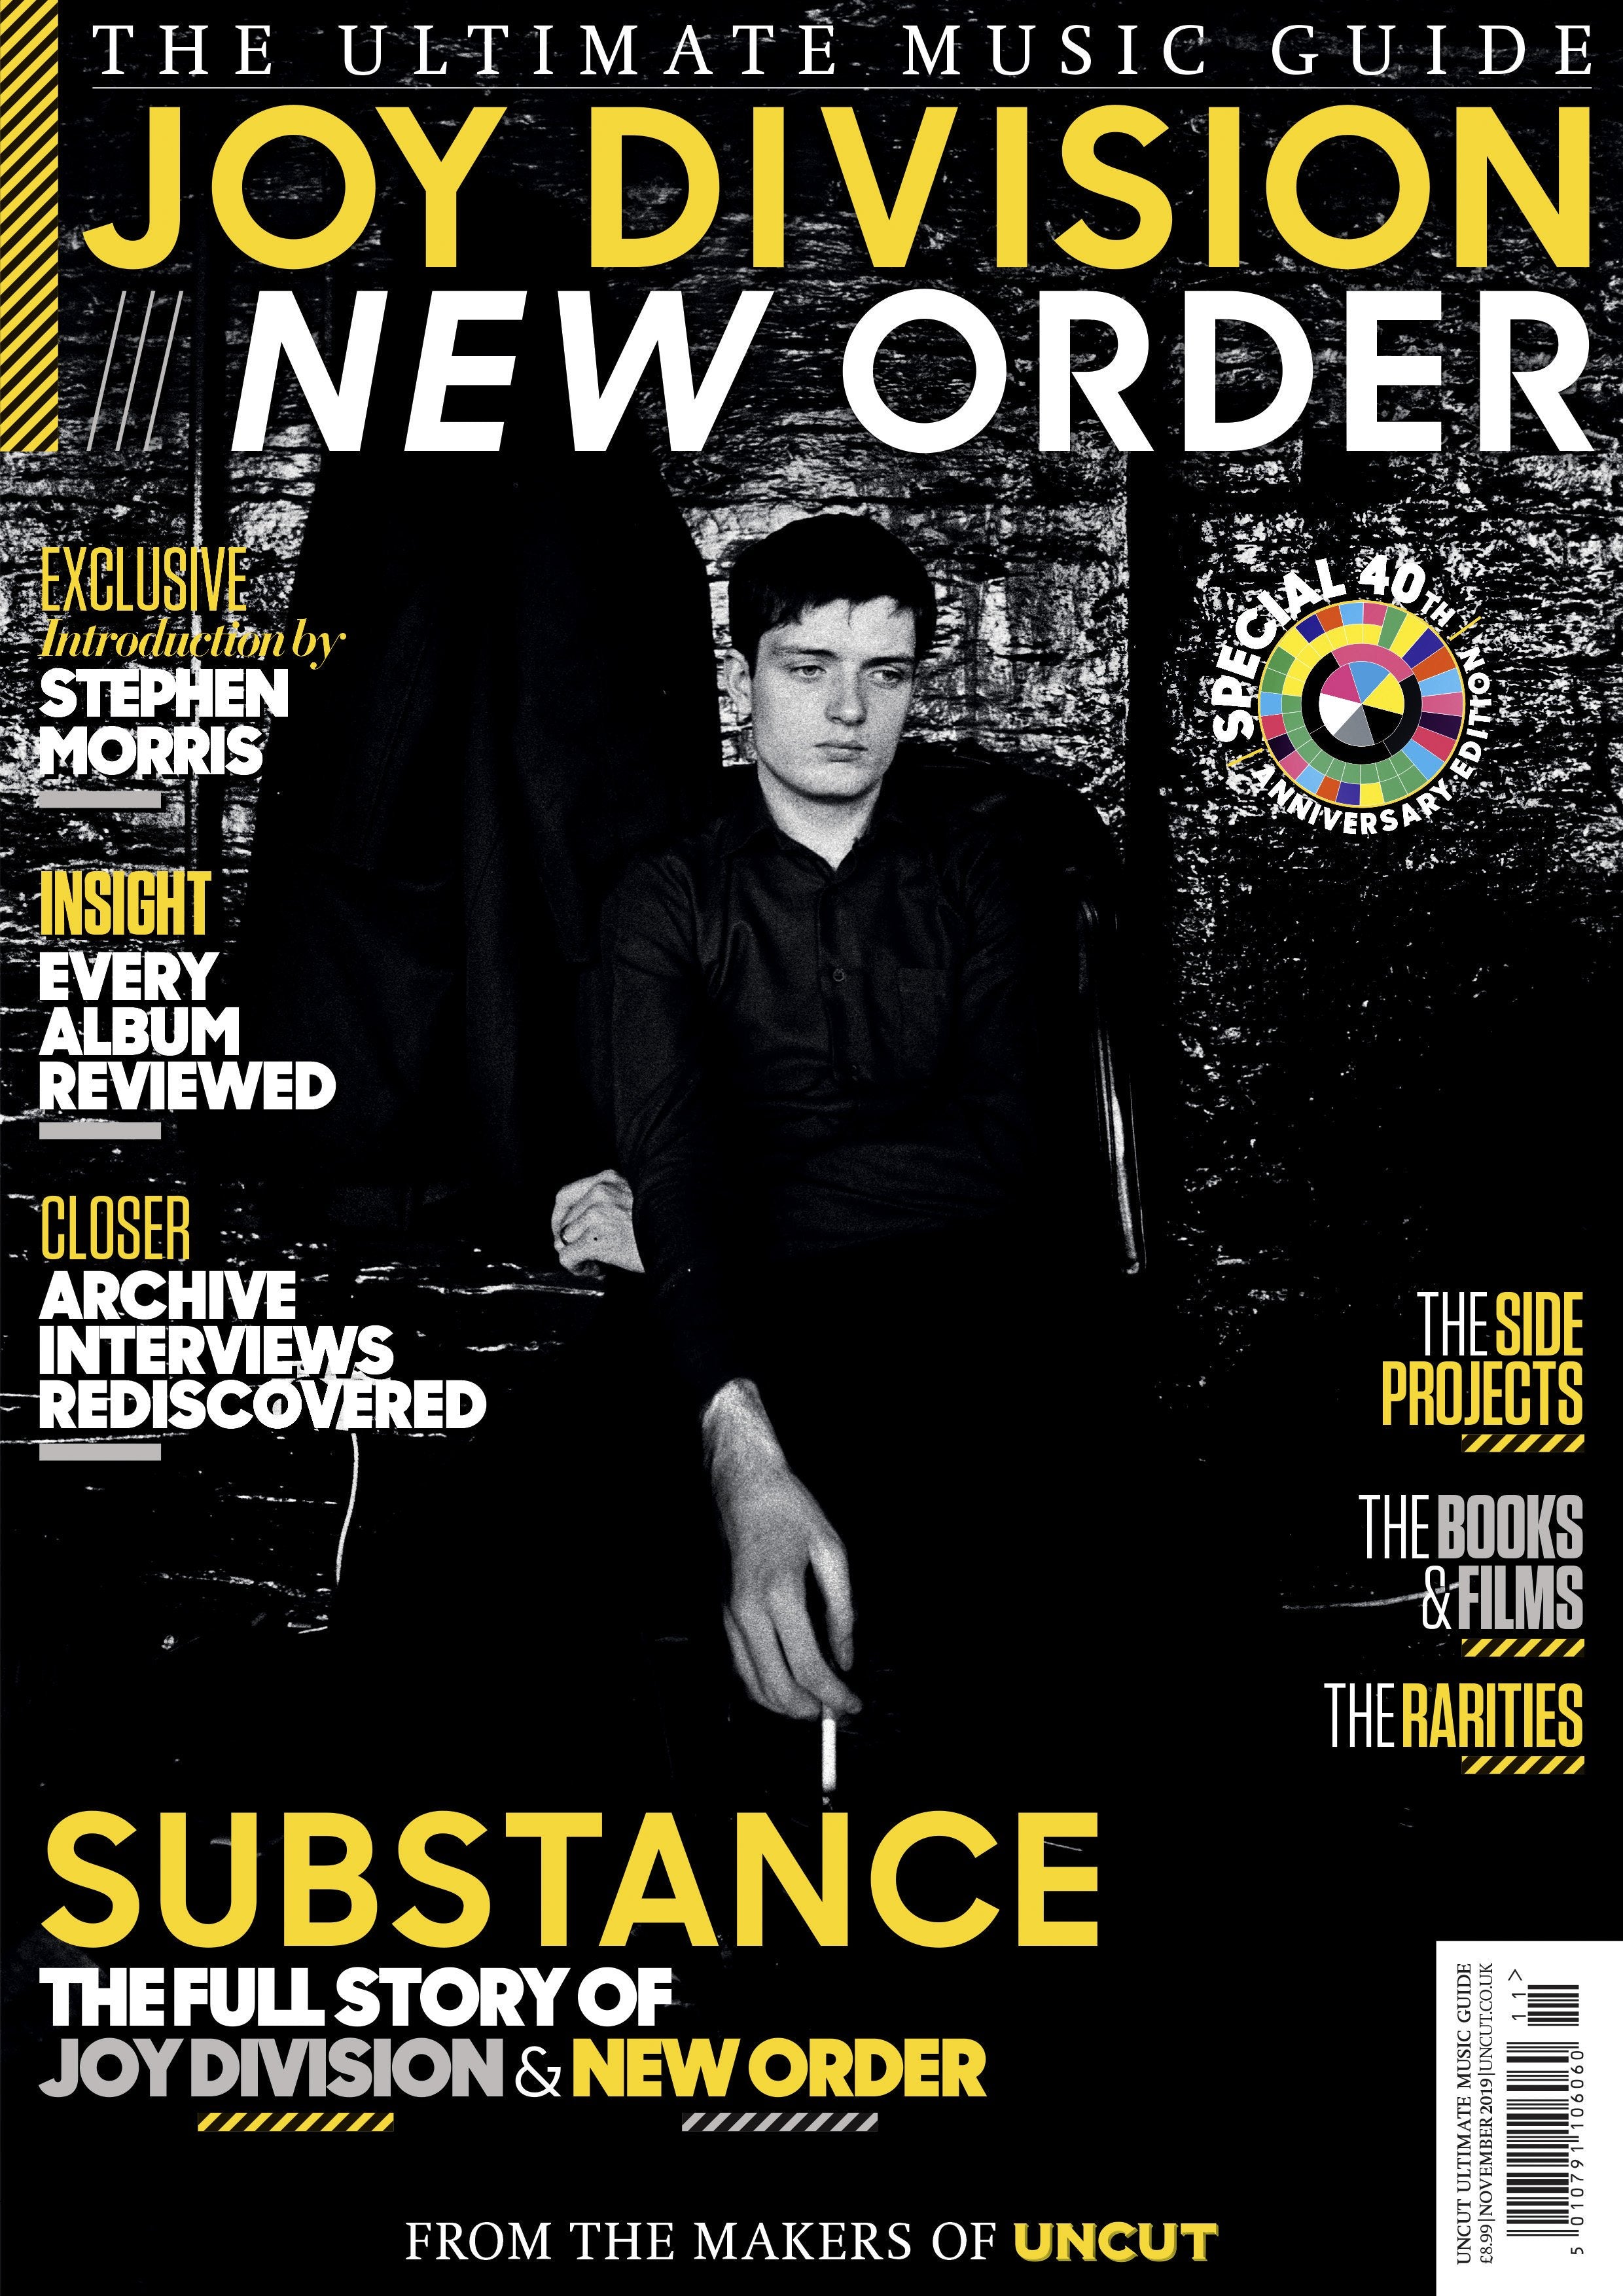 New Order - Substance Definitive Edition coming